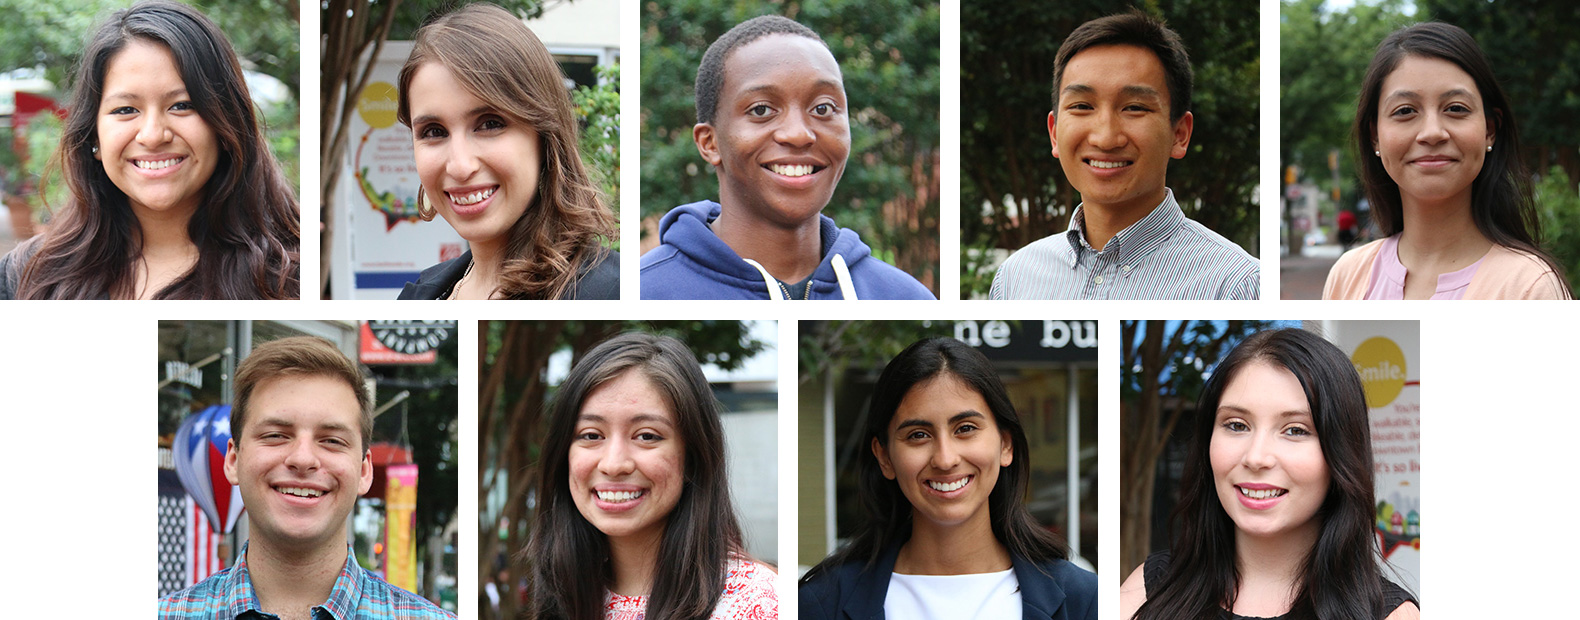 The faces of the 2016 fellows